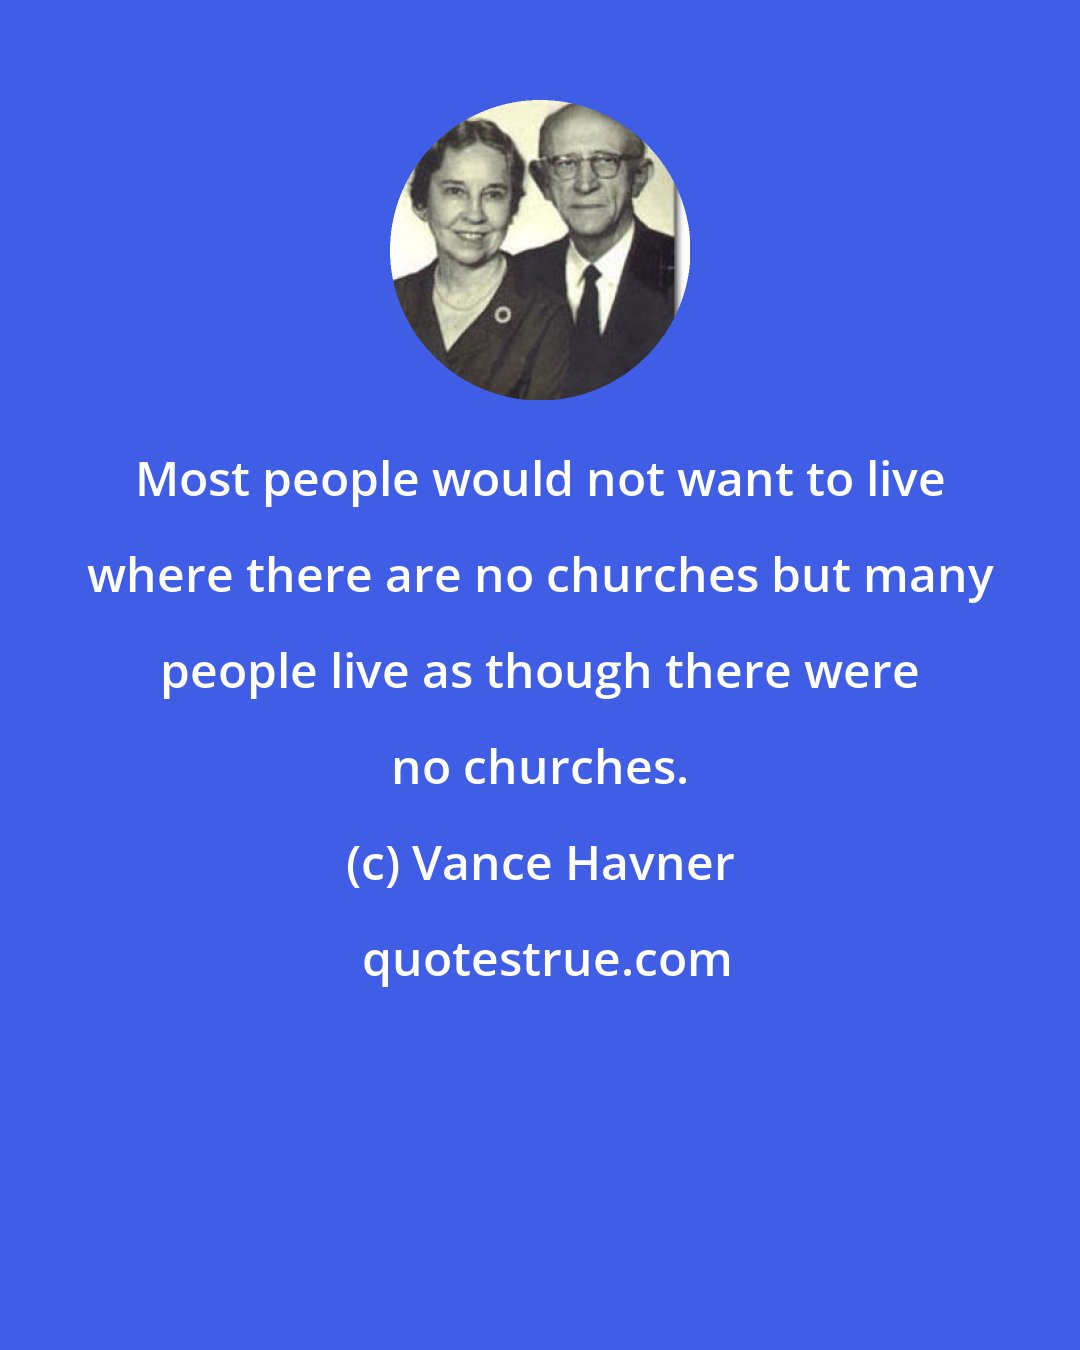 Vance Havner: Most people would not want to live where there are no churches but many people live as though there were no churches.